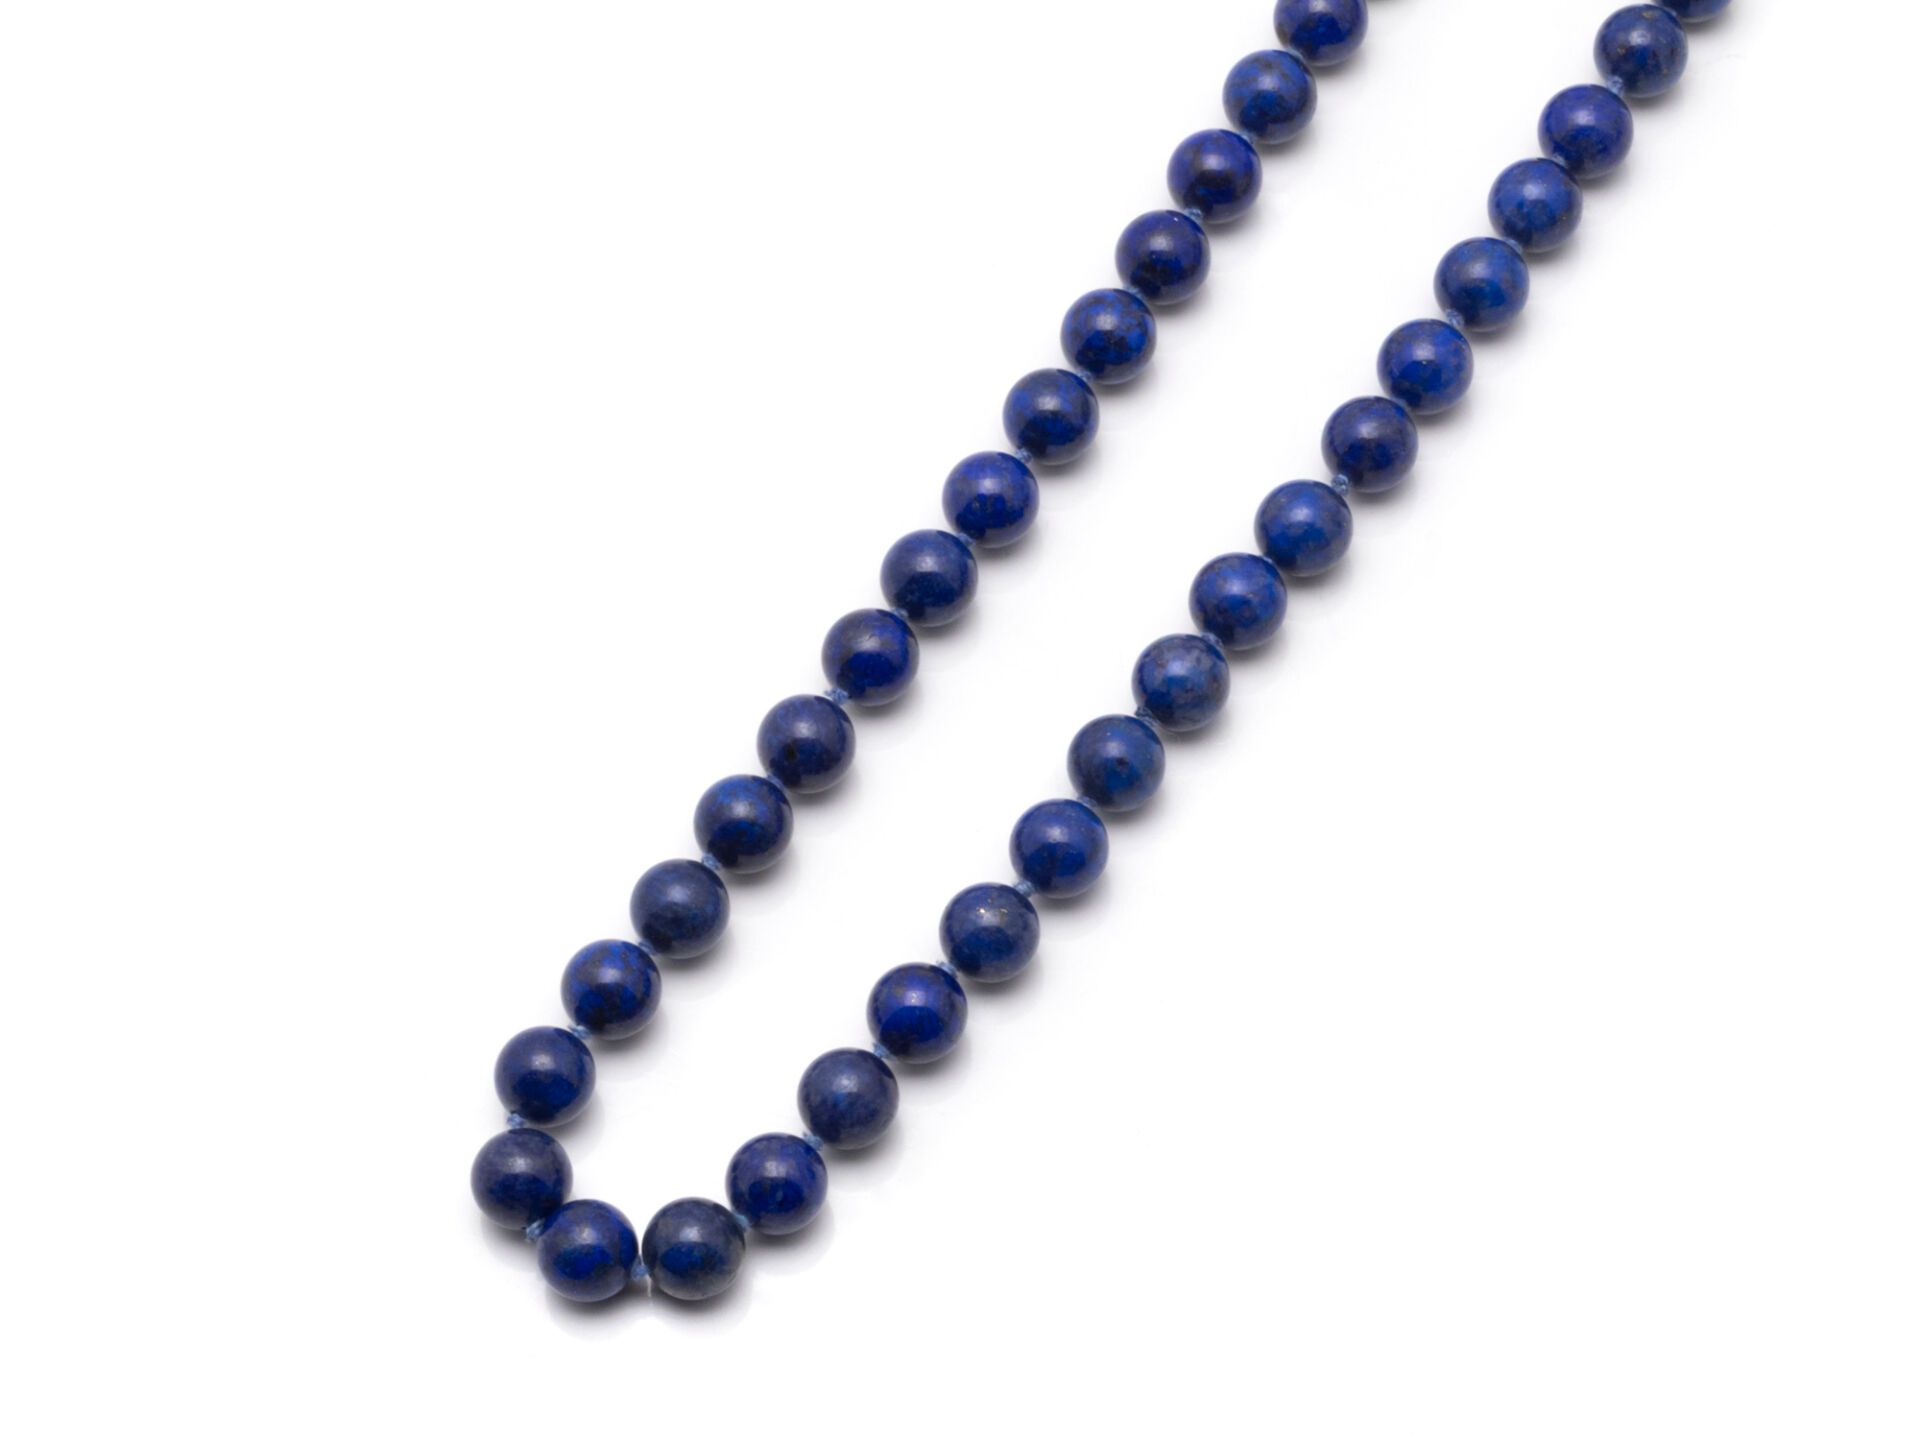 Null Necklace featuring a strand of tinted lapis lazuli beads approx. 10 mm long&hellip;